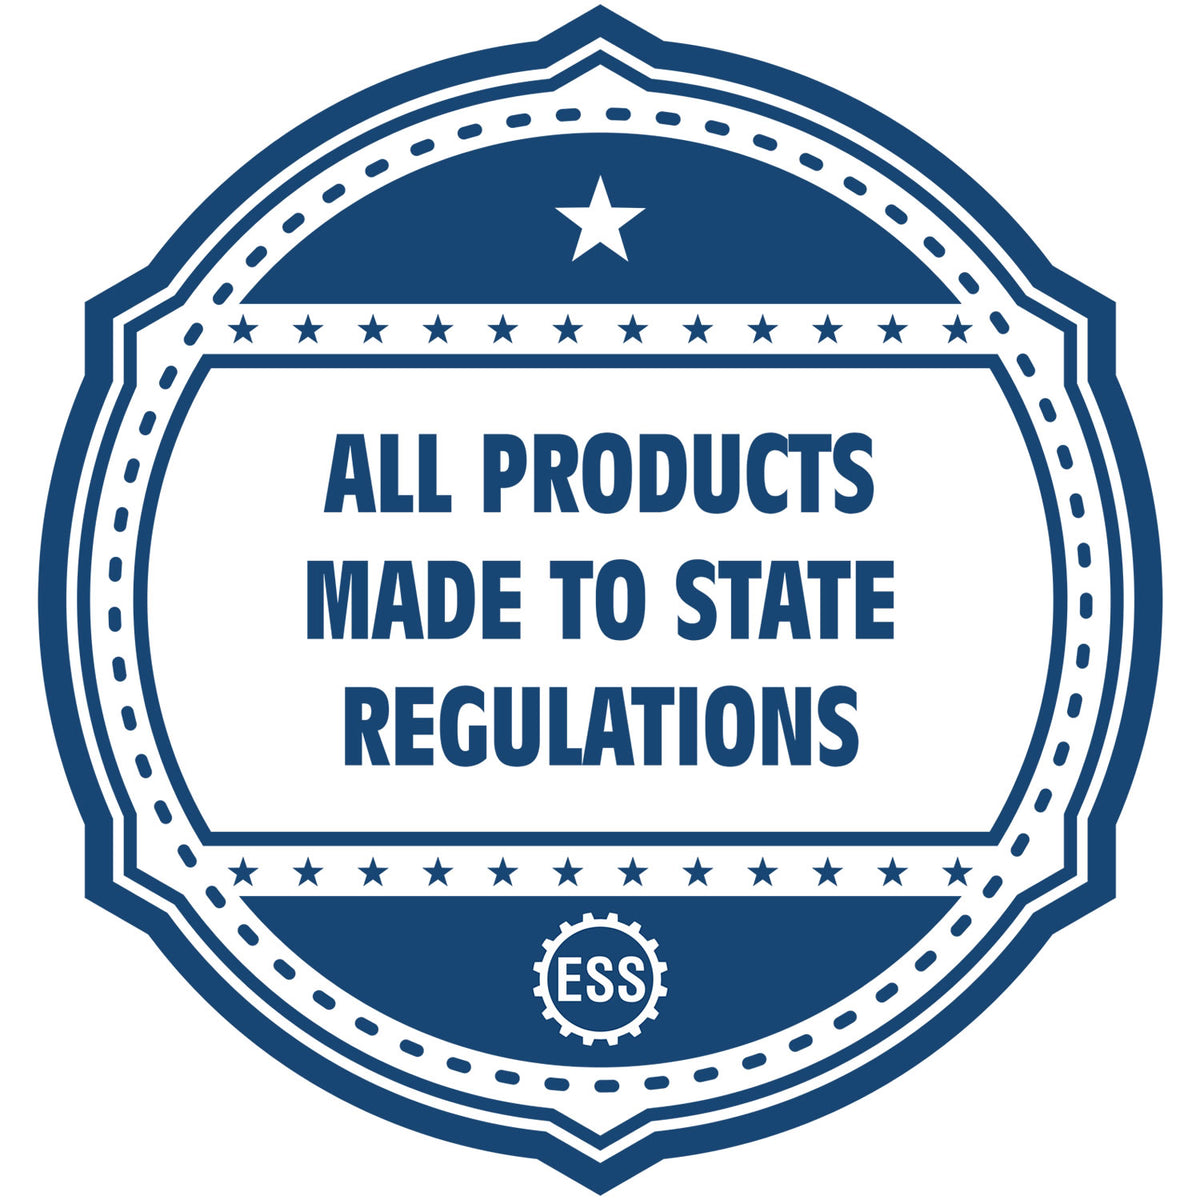 A blue icon or badge for the Gift Tennessee Land Surveyor Seal showing that this product is made in compliance with state regulations.